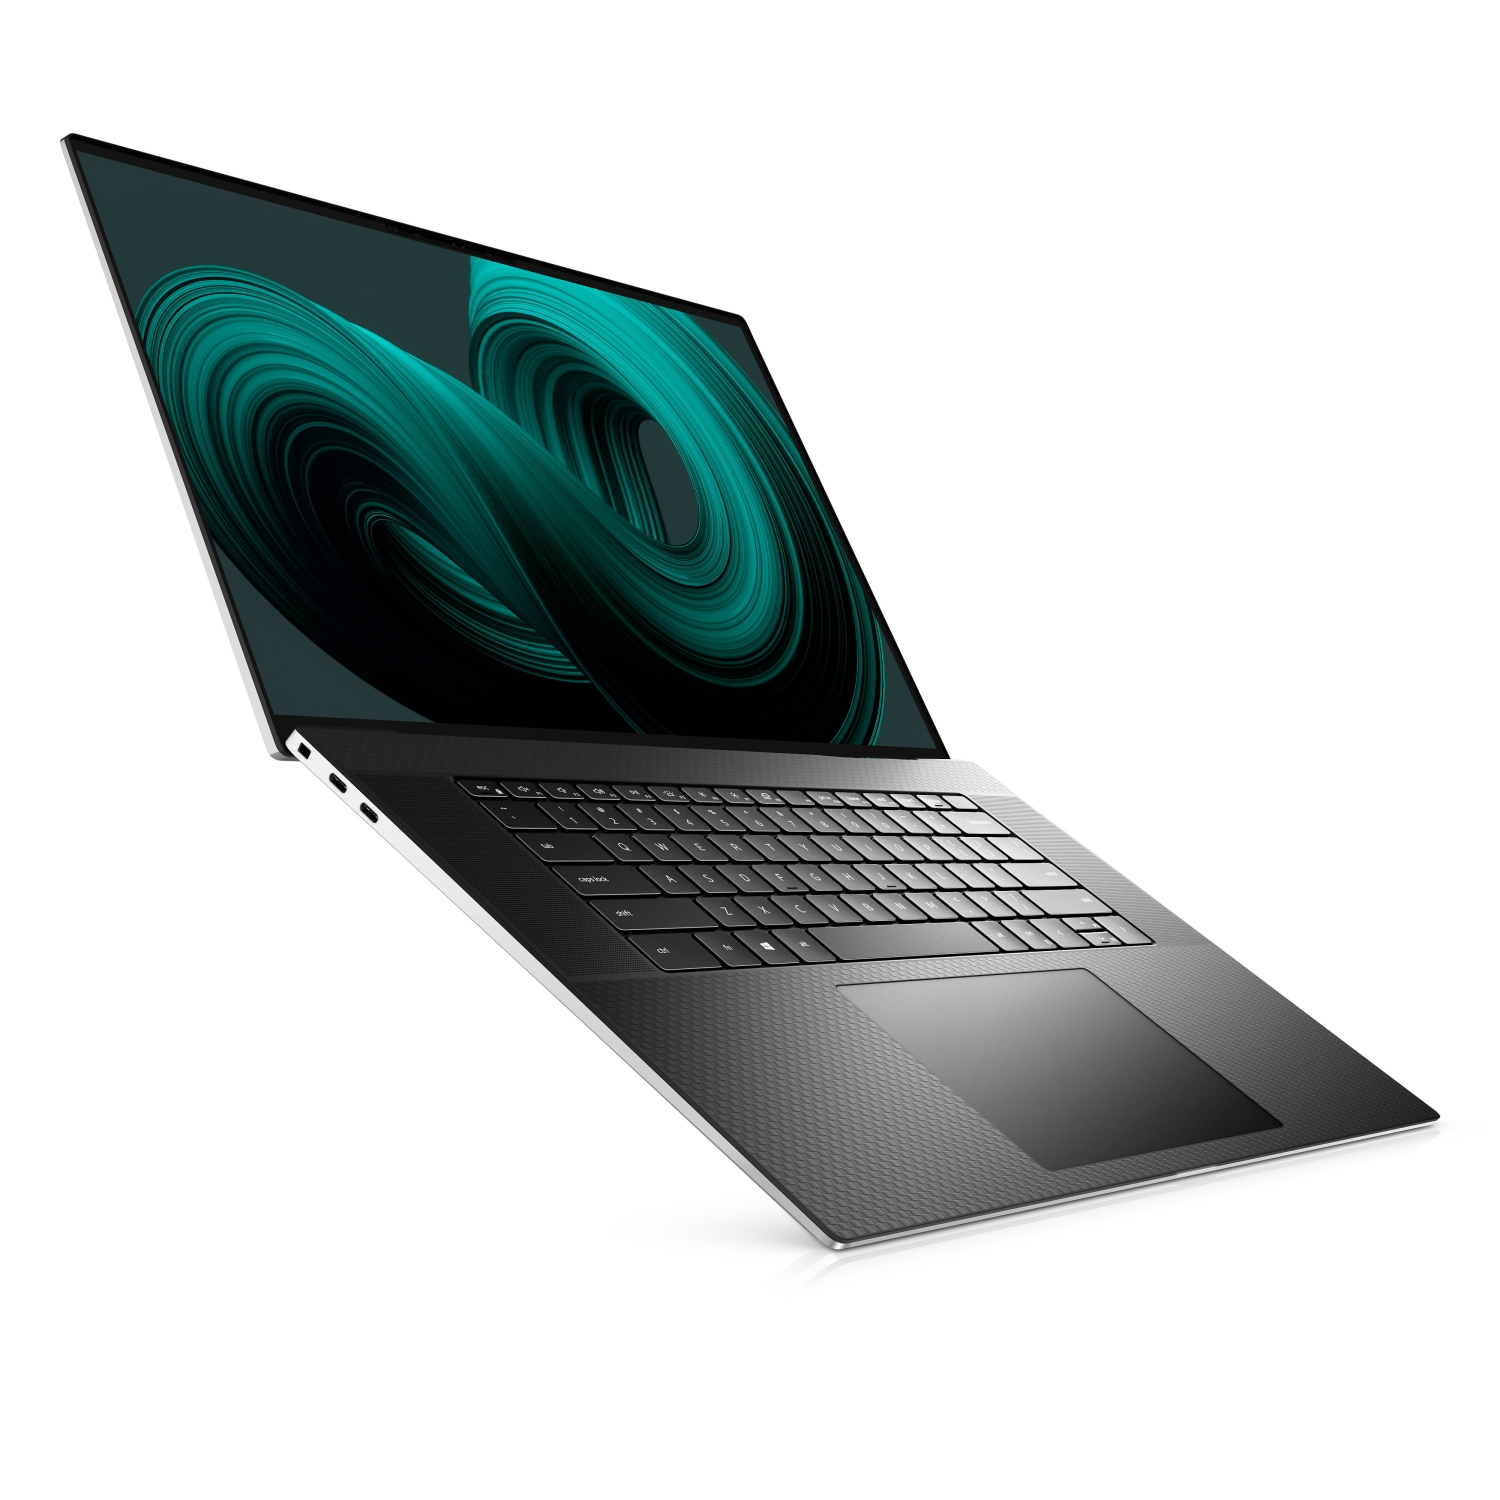 Refurbished (Excellent) - Dell XPS 17 9710 Laptop (2021) | 17" 4K Touch | Core i7 - 2TB SSD - 32GB RAM - RTX 3060 | 8 Cores @ 4.6 GHz - 11th Gen CPU Certified Refurbished